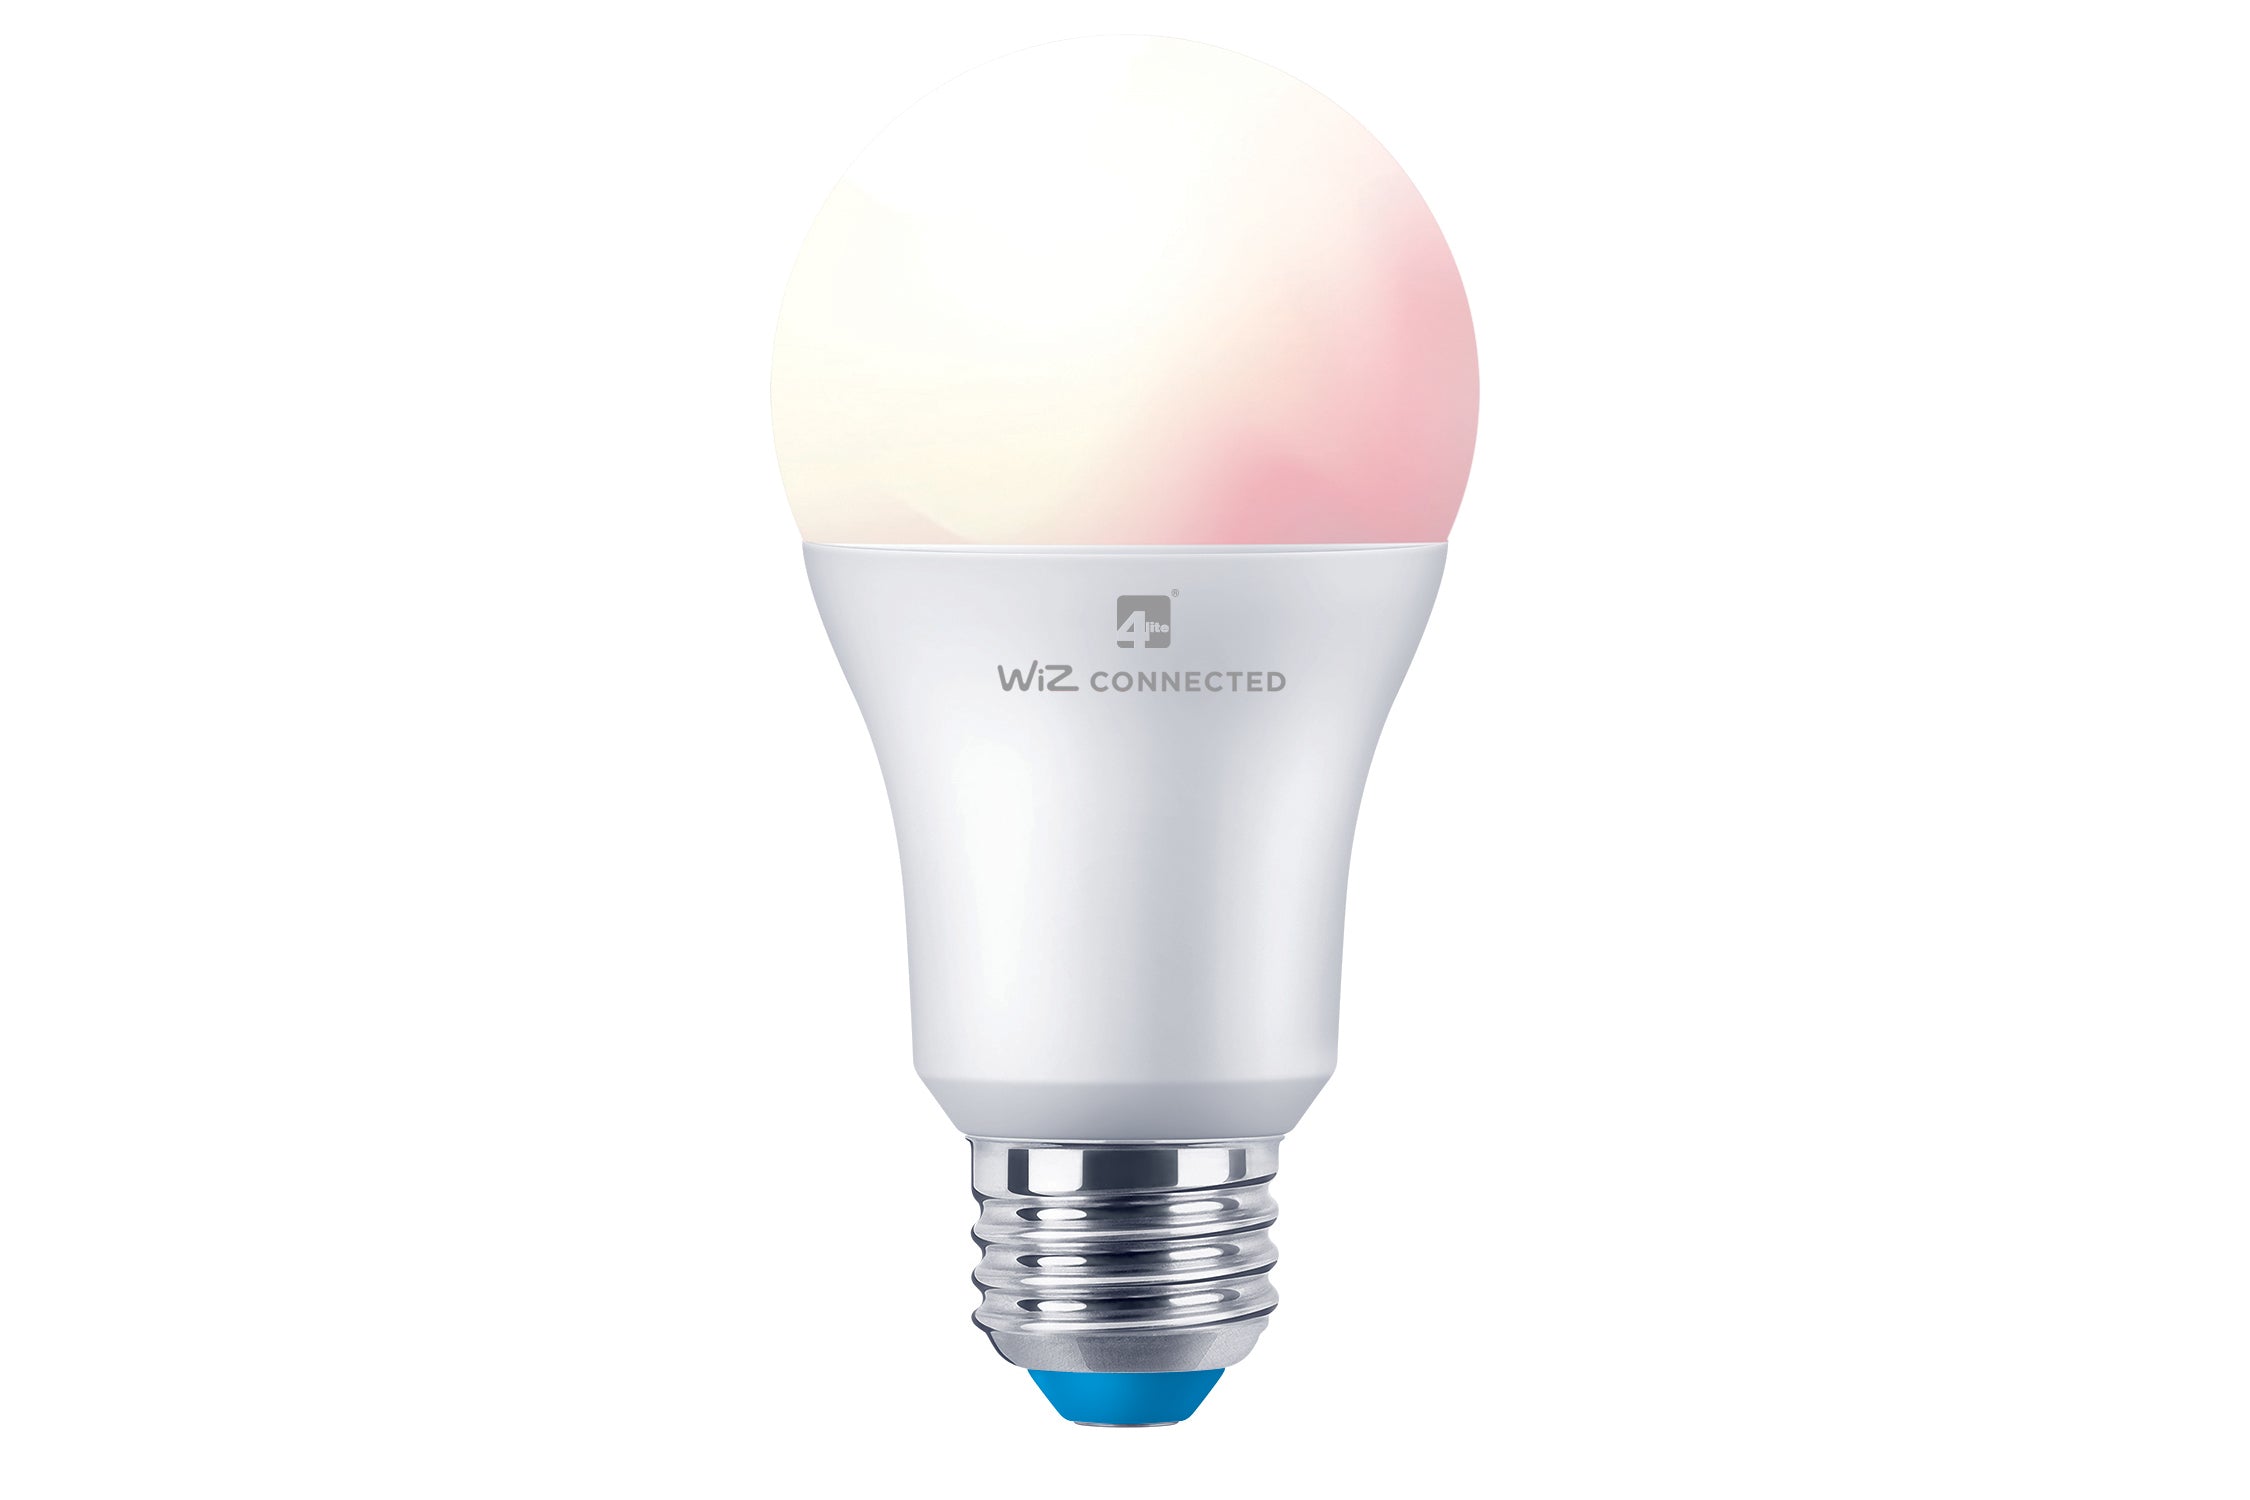 Smart Lighting Deals on 4lite WiZ Connected Lightbulbs, Indoor Lighting, Outdoor Lighting, Smart plugs, sensors and more with our January Sale offers!